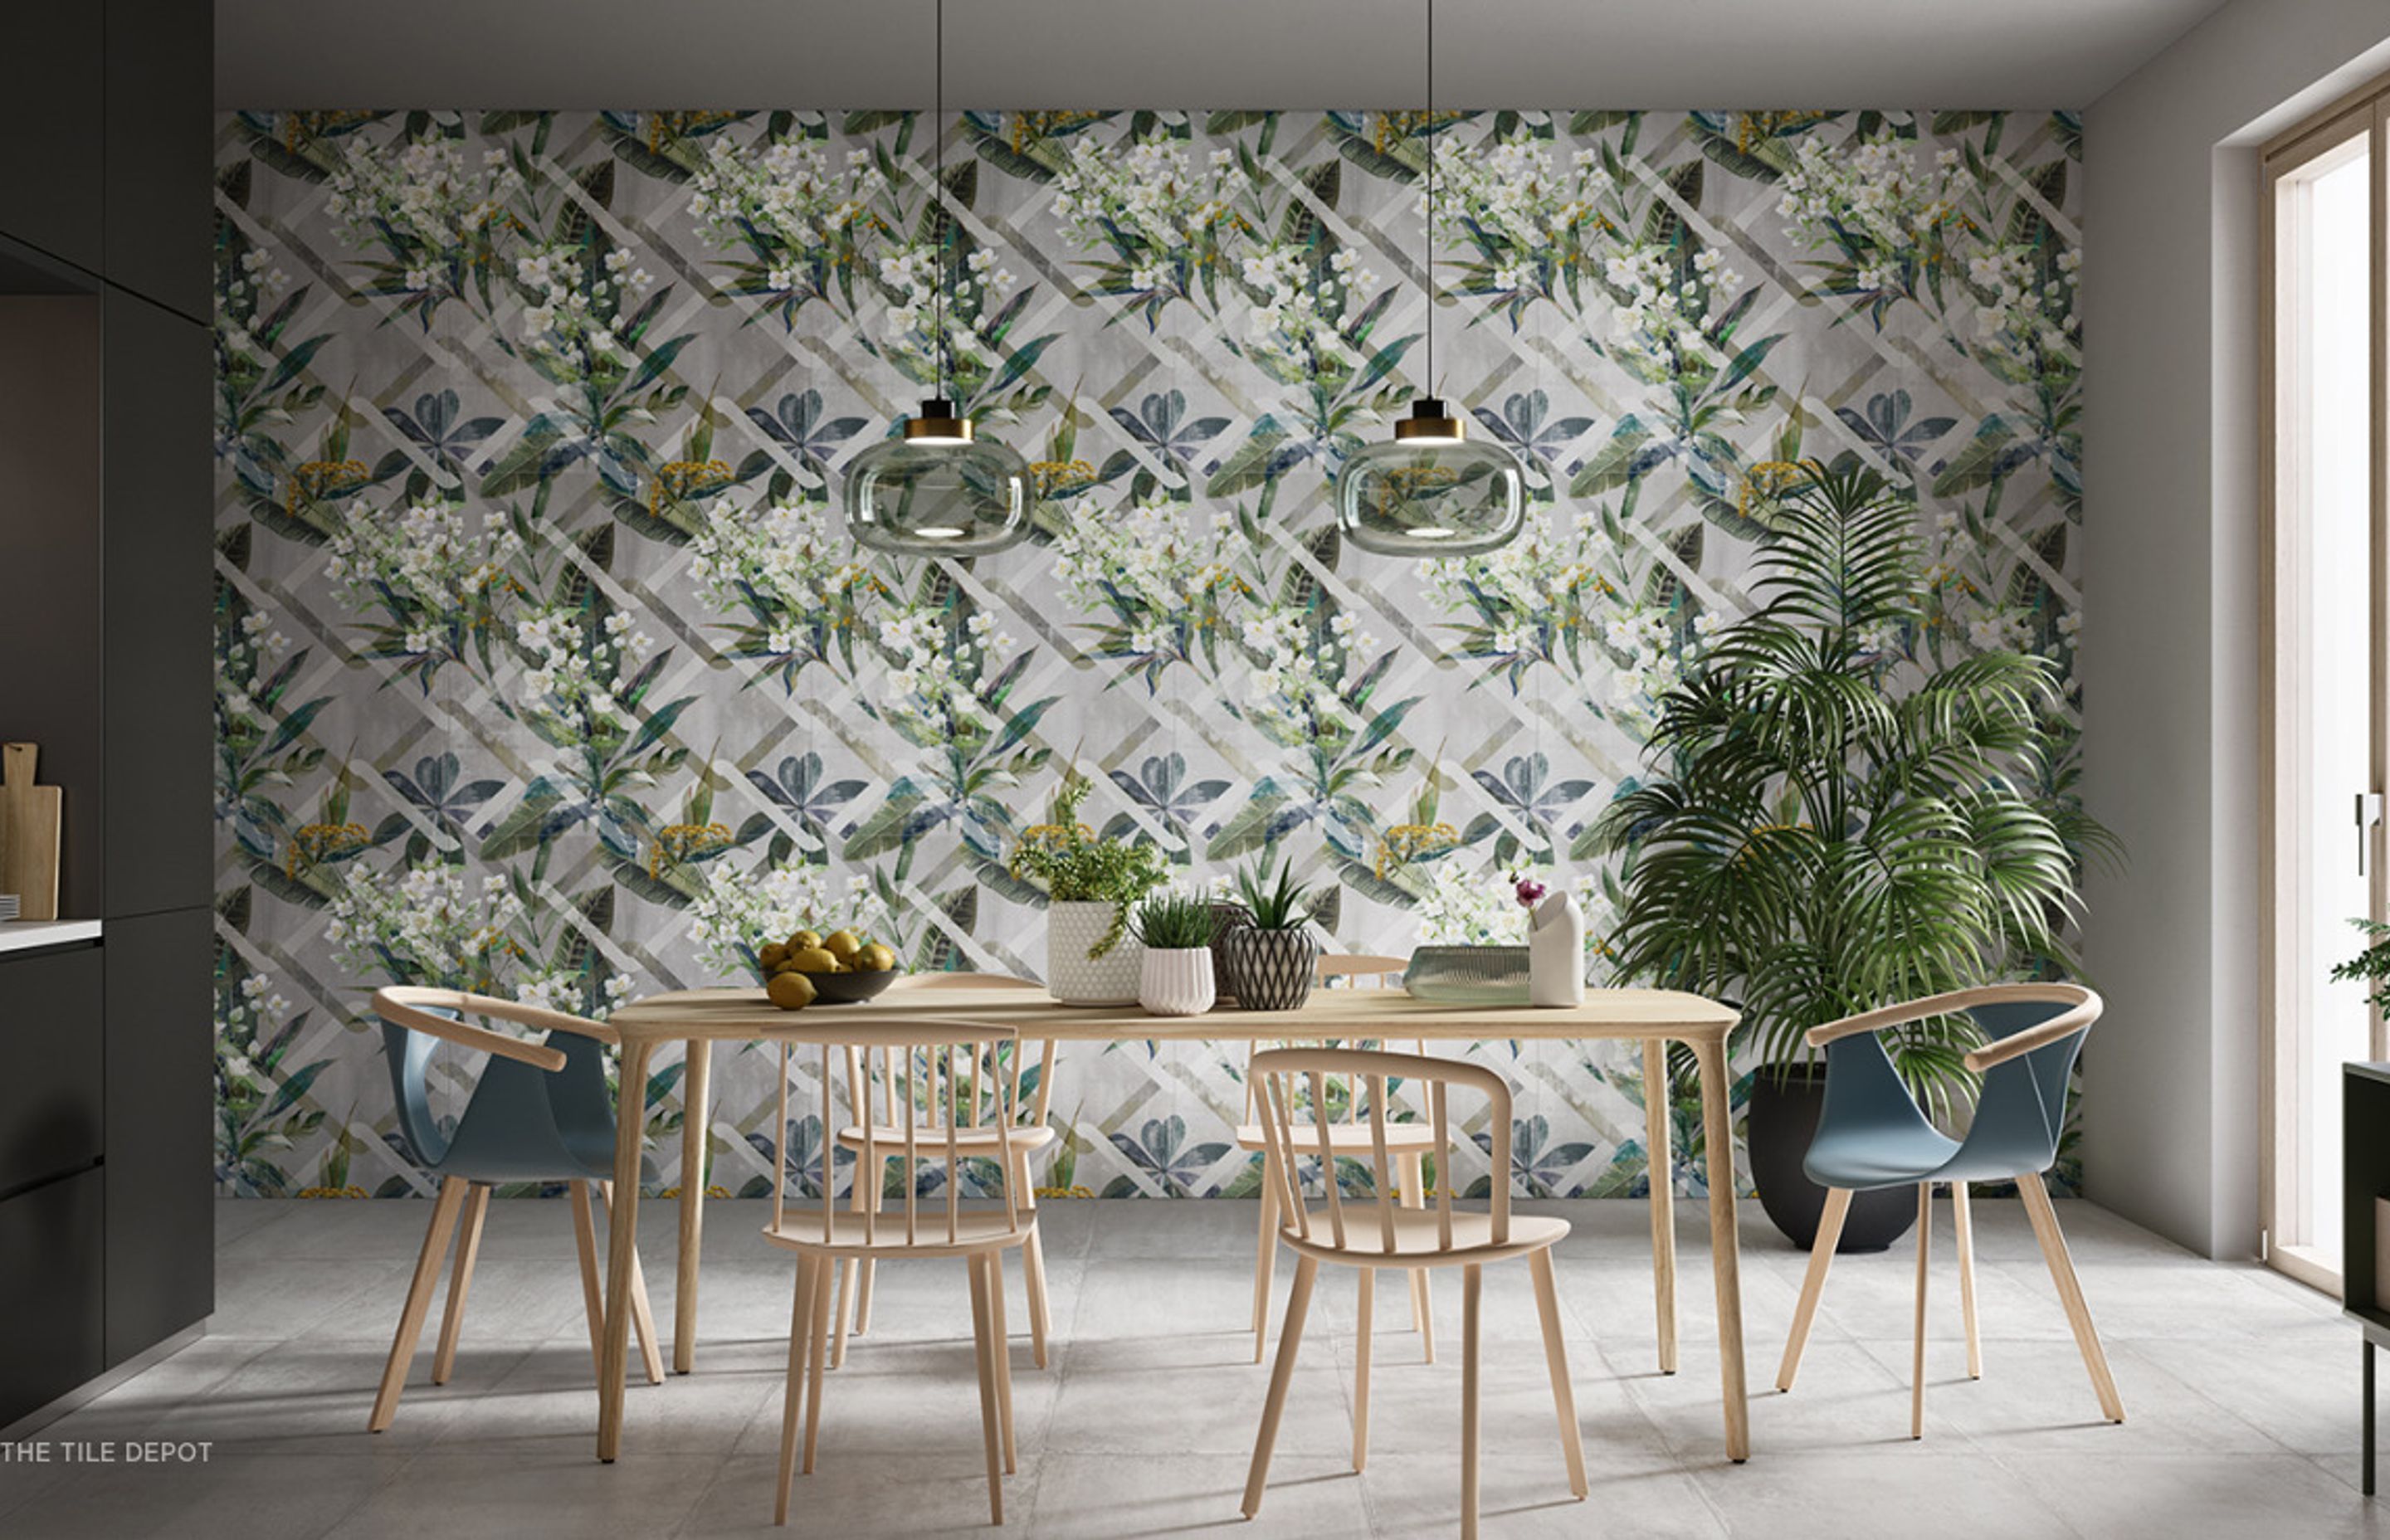 These Glam tiles from Tile depot feature 3 large 1200 by 900 tiles that are installed together to create a pattern. These three tiles are repeated to make this feature wall. This Glam collection has various styles of flowers and leaves. (Tile Depot, 2021)